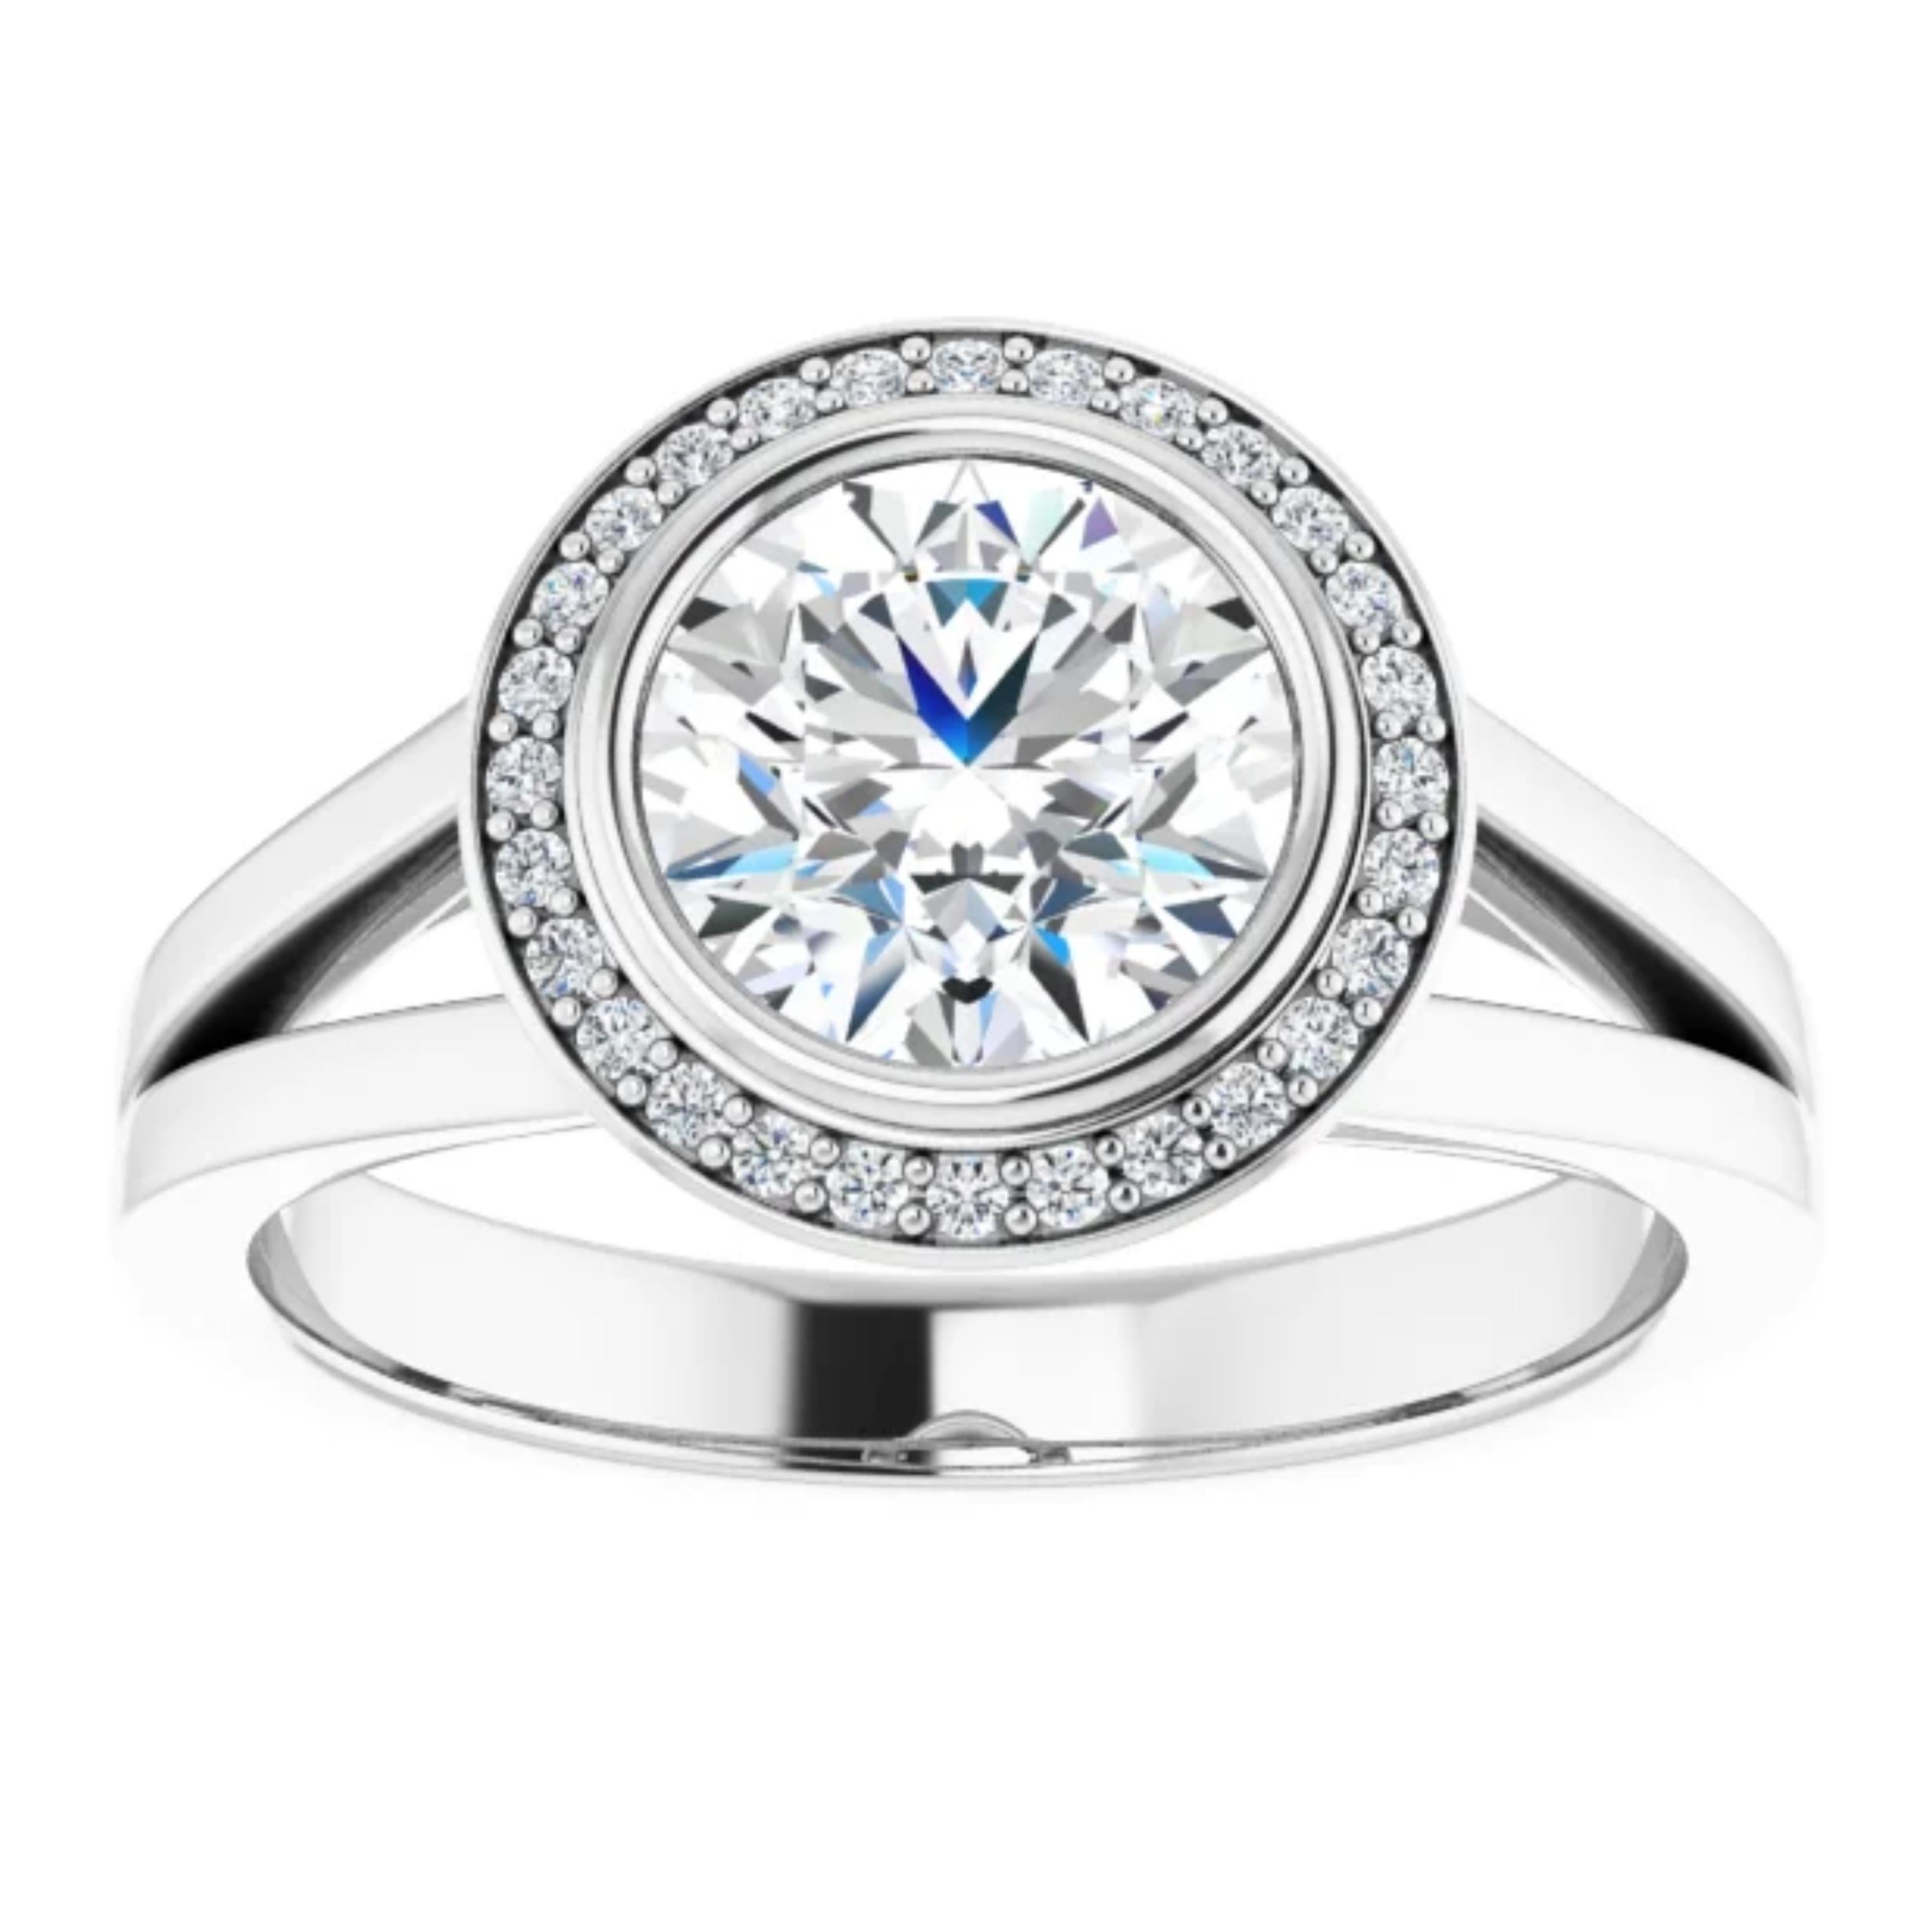 The plain shank of this engagement ring splits as it reaches the center stone on this engagement ring. A halo of shimmering white diamonds surrounds the GIA certified center diamond.

Style Number: ScintilleNora-1872653

Center Stone:
1 Round